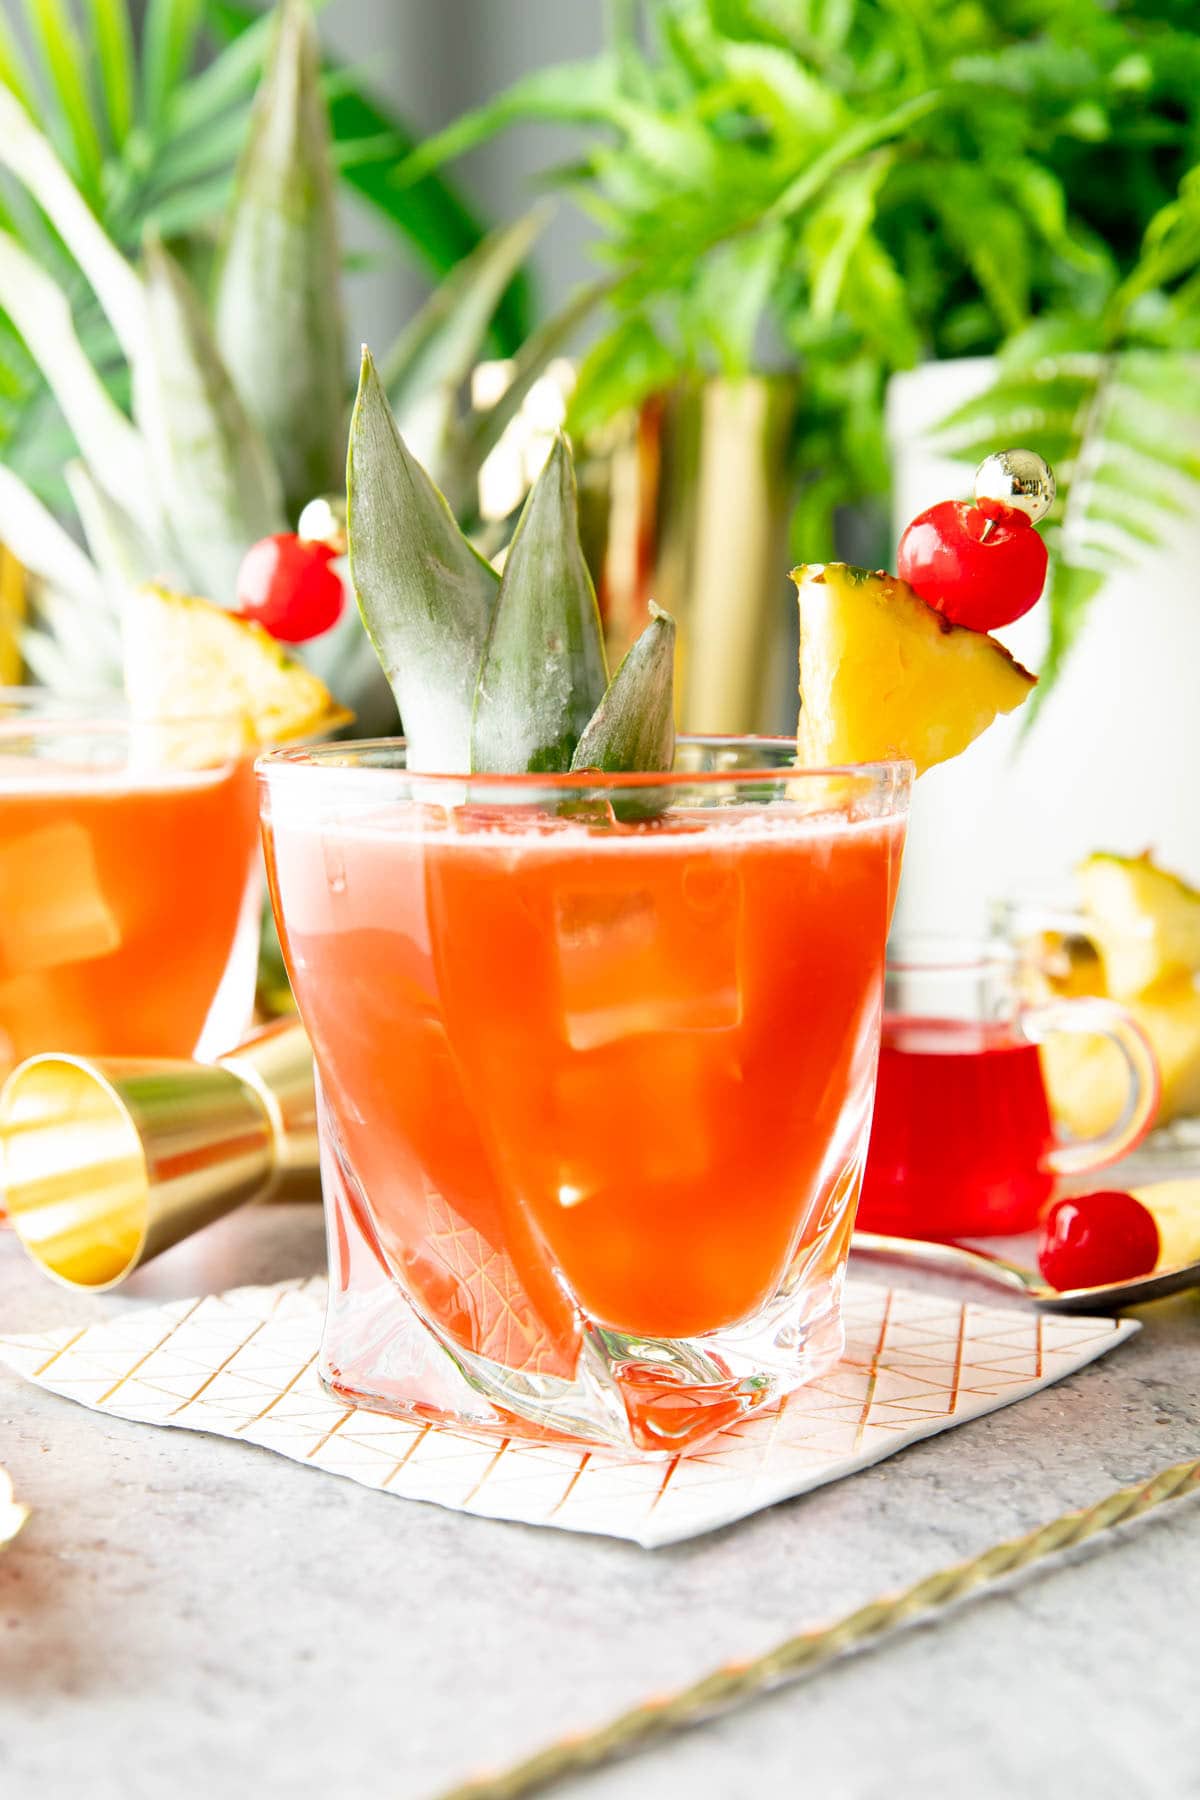 Tropical pineapple rum drink served with maraschino cherry syrup, a cocktail set and palm leaves